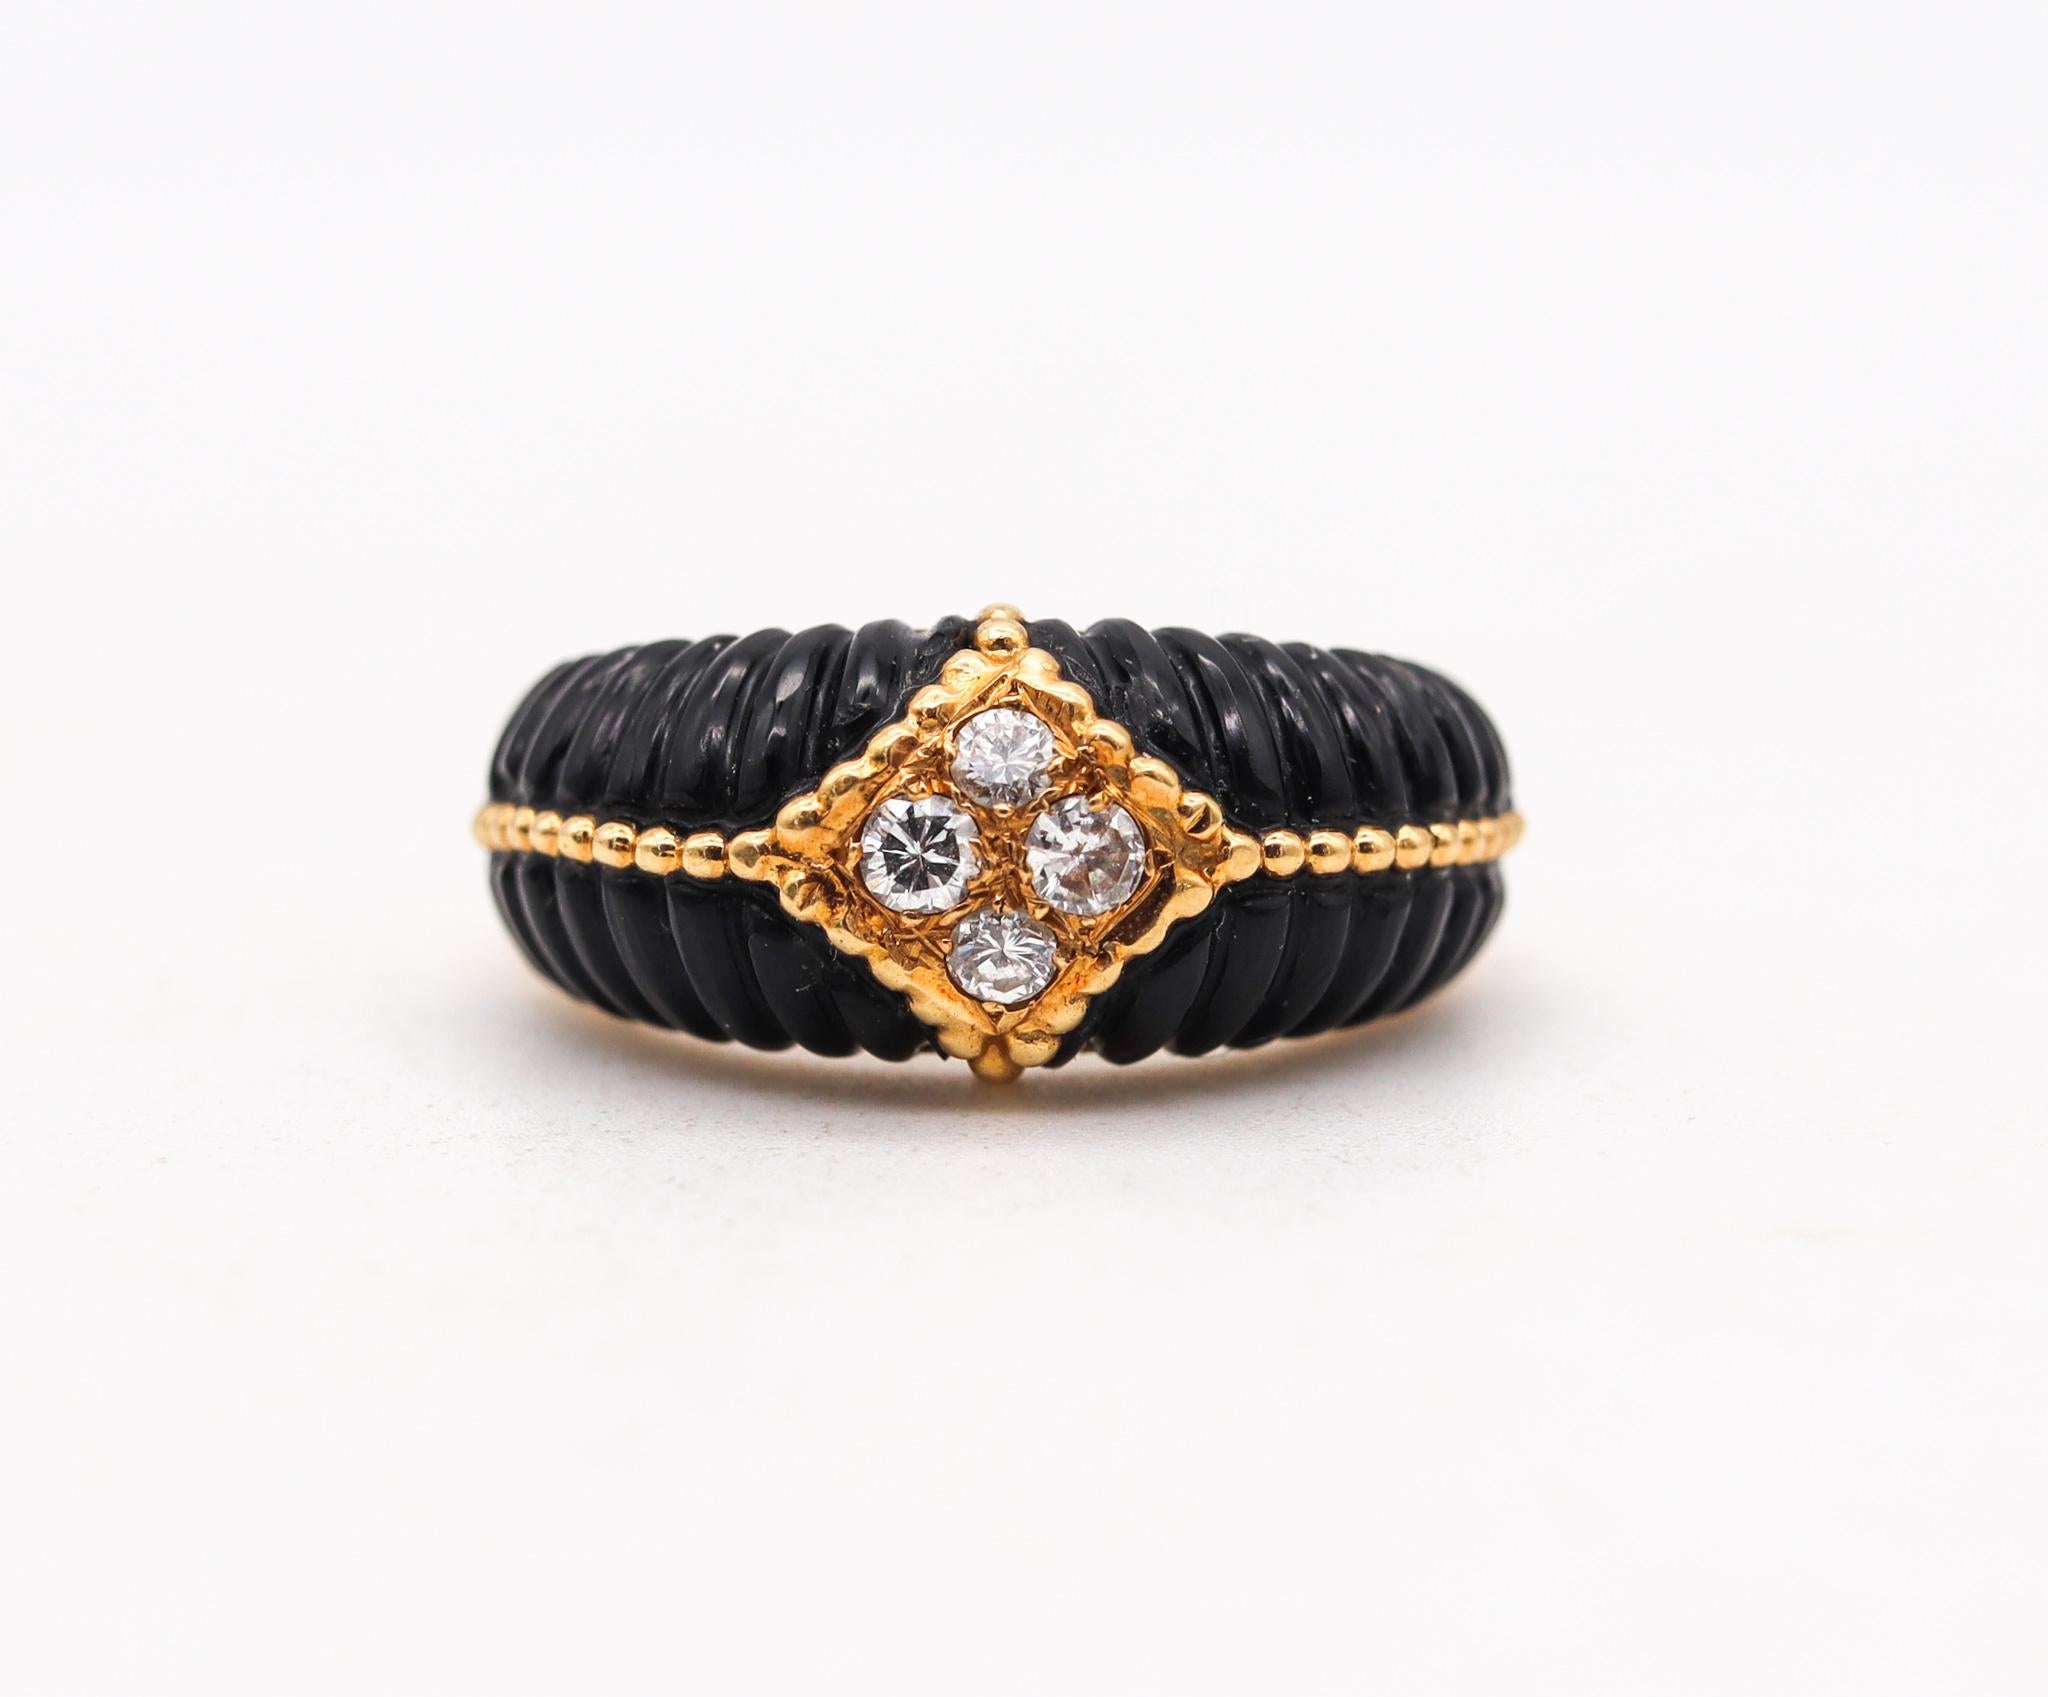 Band ring designed by Van Cleef & Arpels.

A vintage ring made in Paris France circa late 1970's. It was crafted by the house of Van Cleef & Arpels in solid yellow gold of 18 karats with high polished finish and embellished with four special fluted